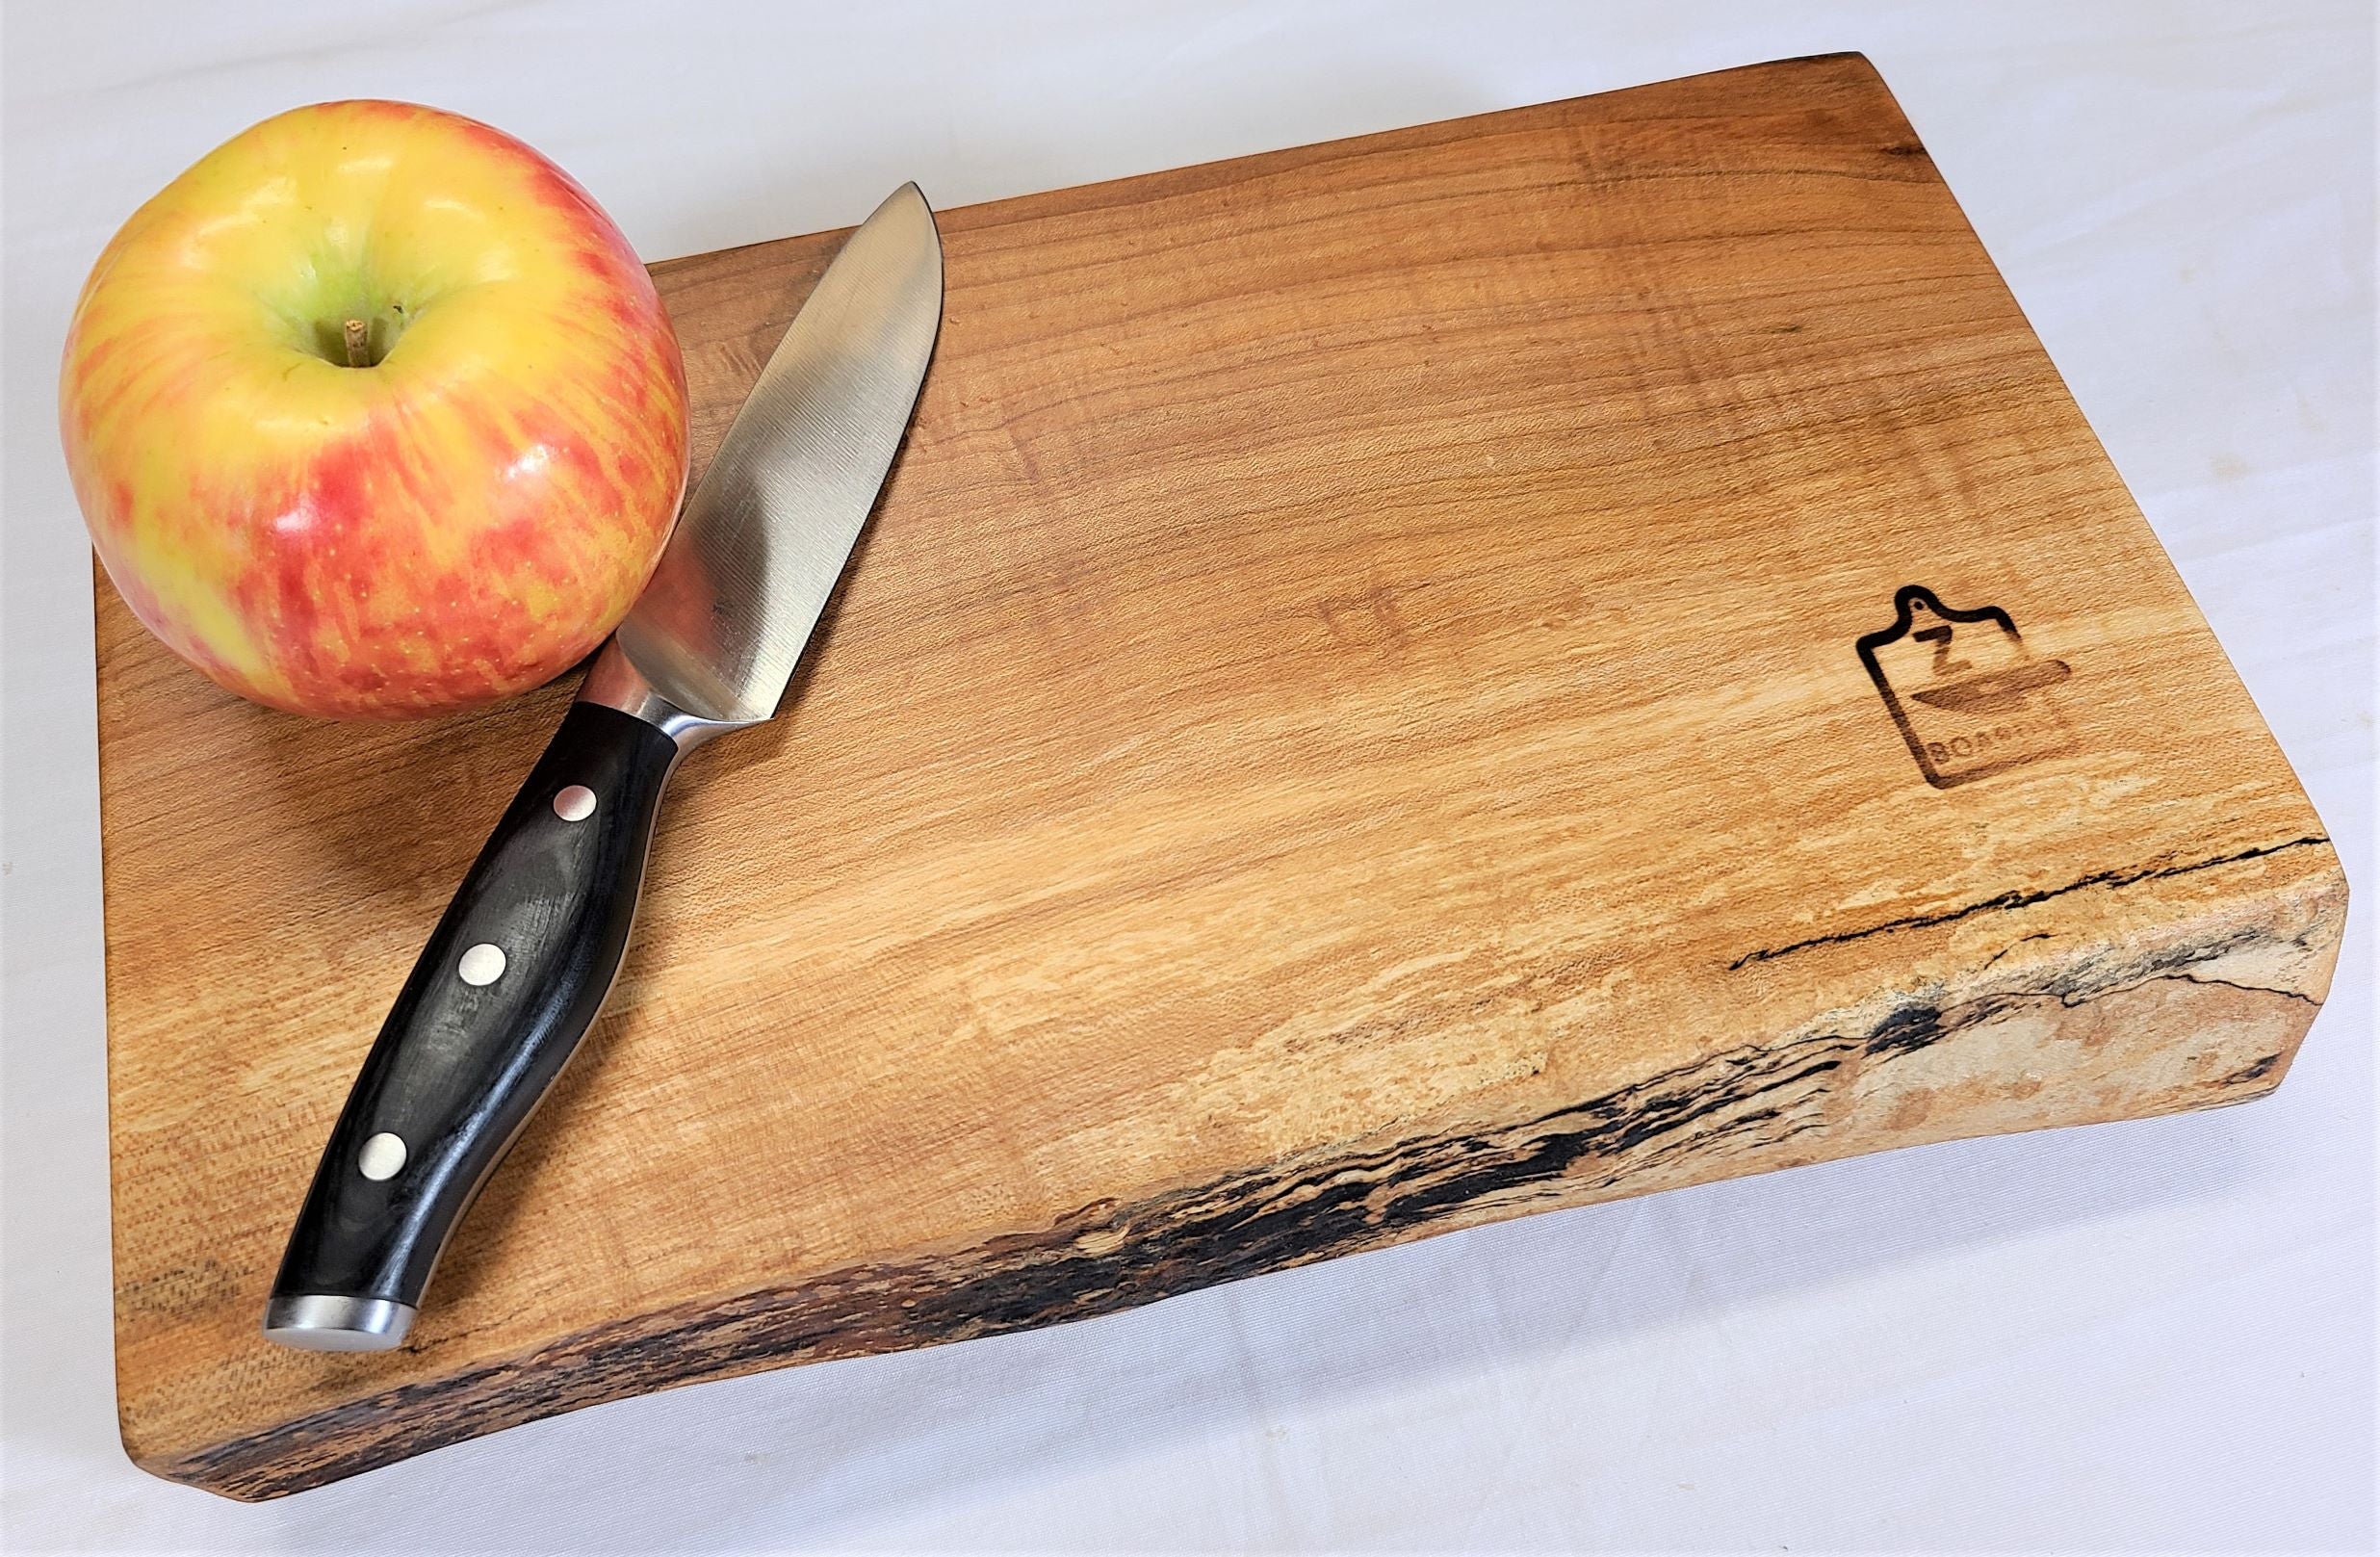 Live edge maple wood cutting board that will become the cutting board you reach for everyday.  Made in USA by ZimBoards